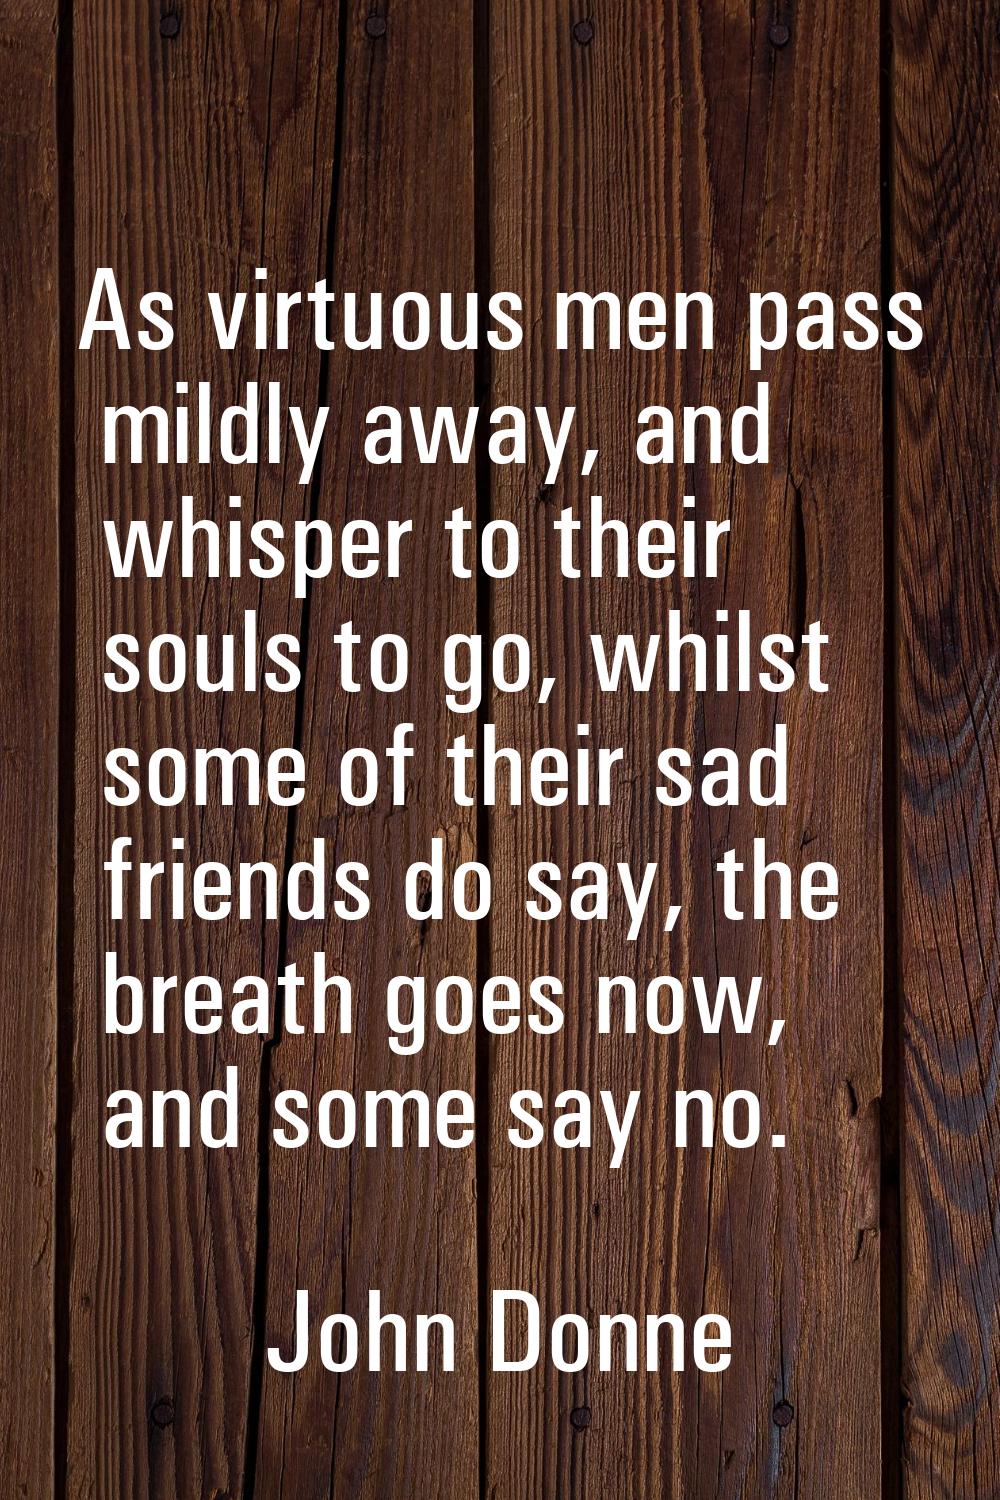 As virtuous men pass mildly away, and whisper to their souls to go, whilst some of their sad friend